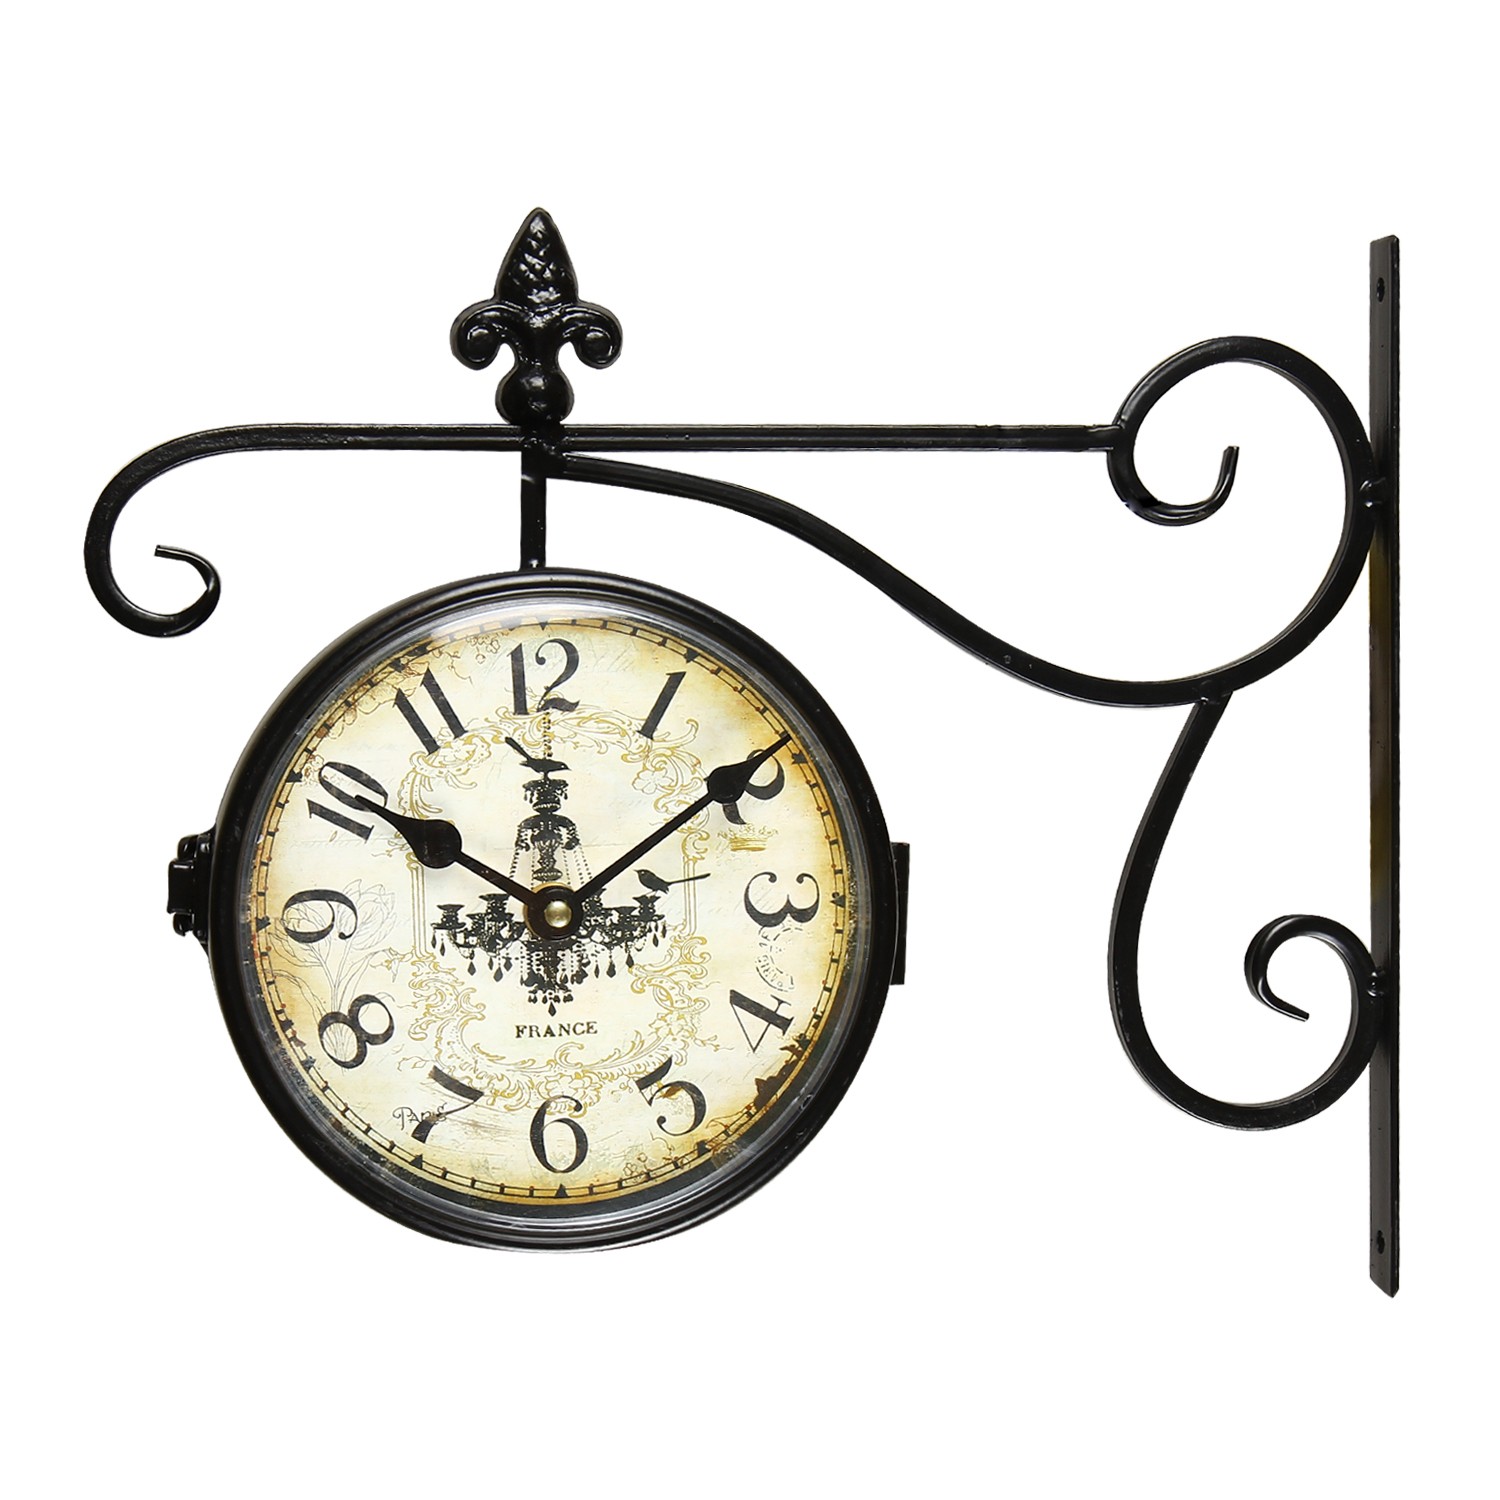 Framed In Splendid And Magnificent Wood And Brass. Elegant Hanging wall Clock 